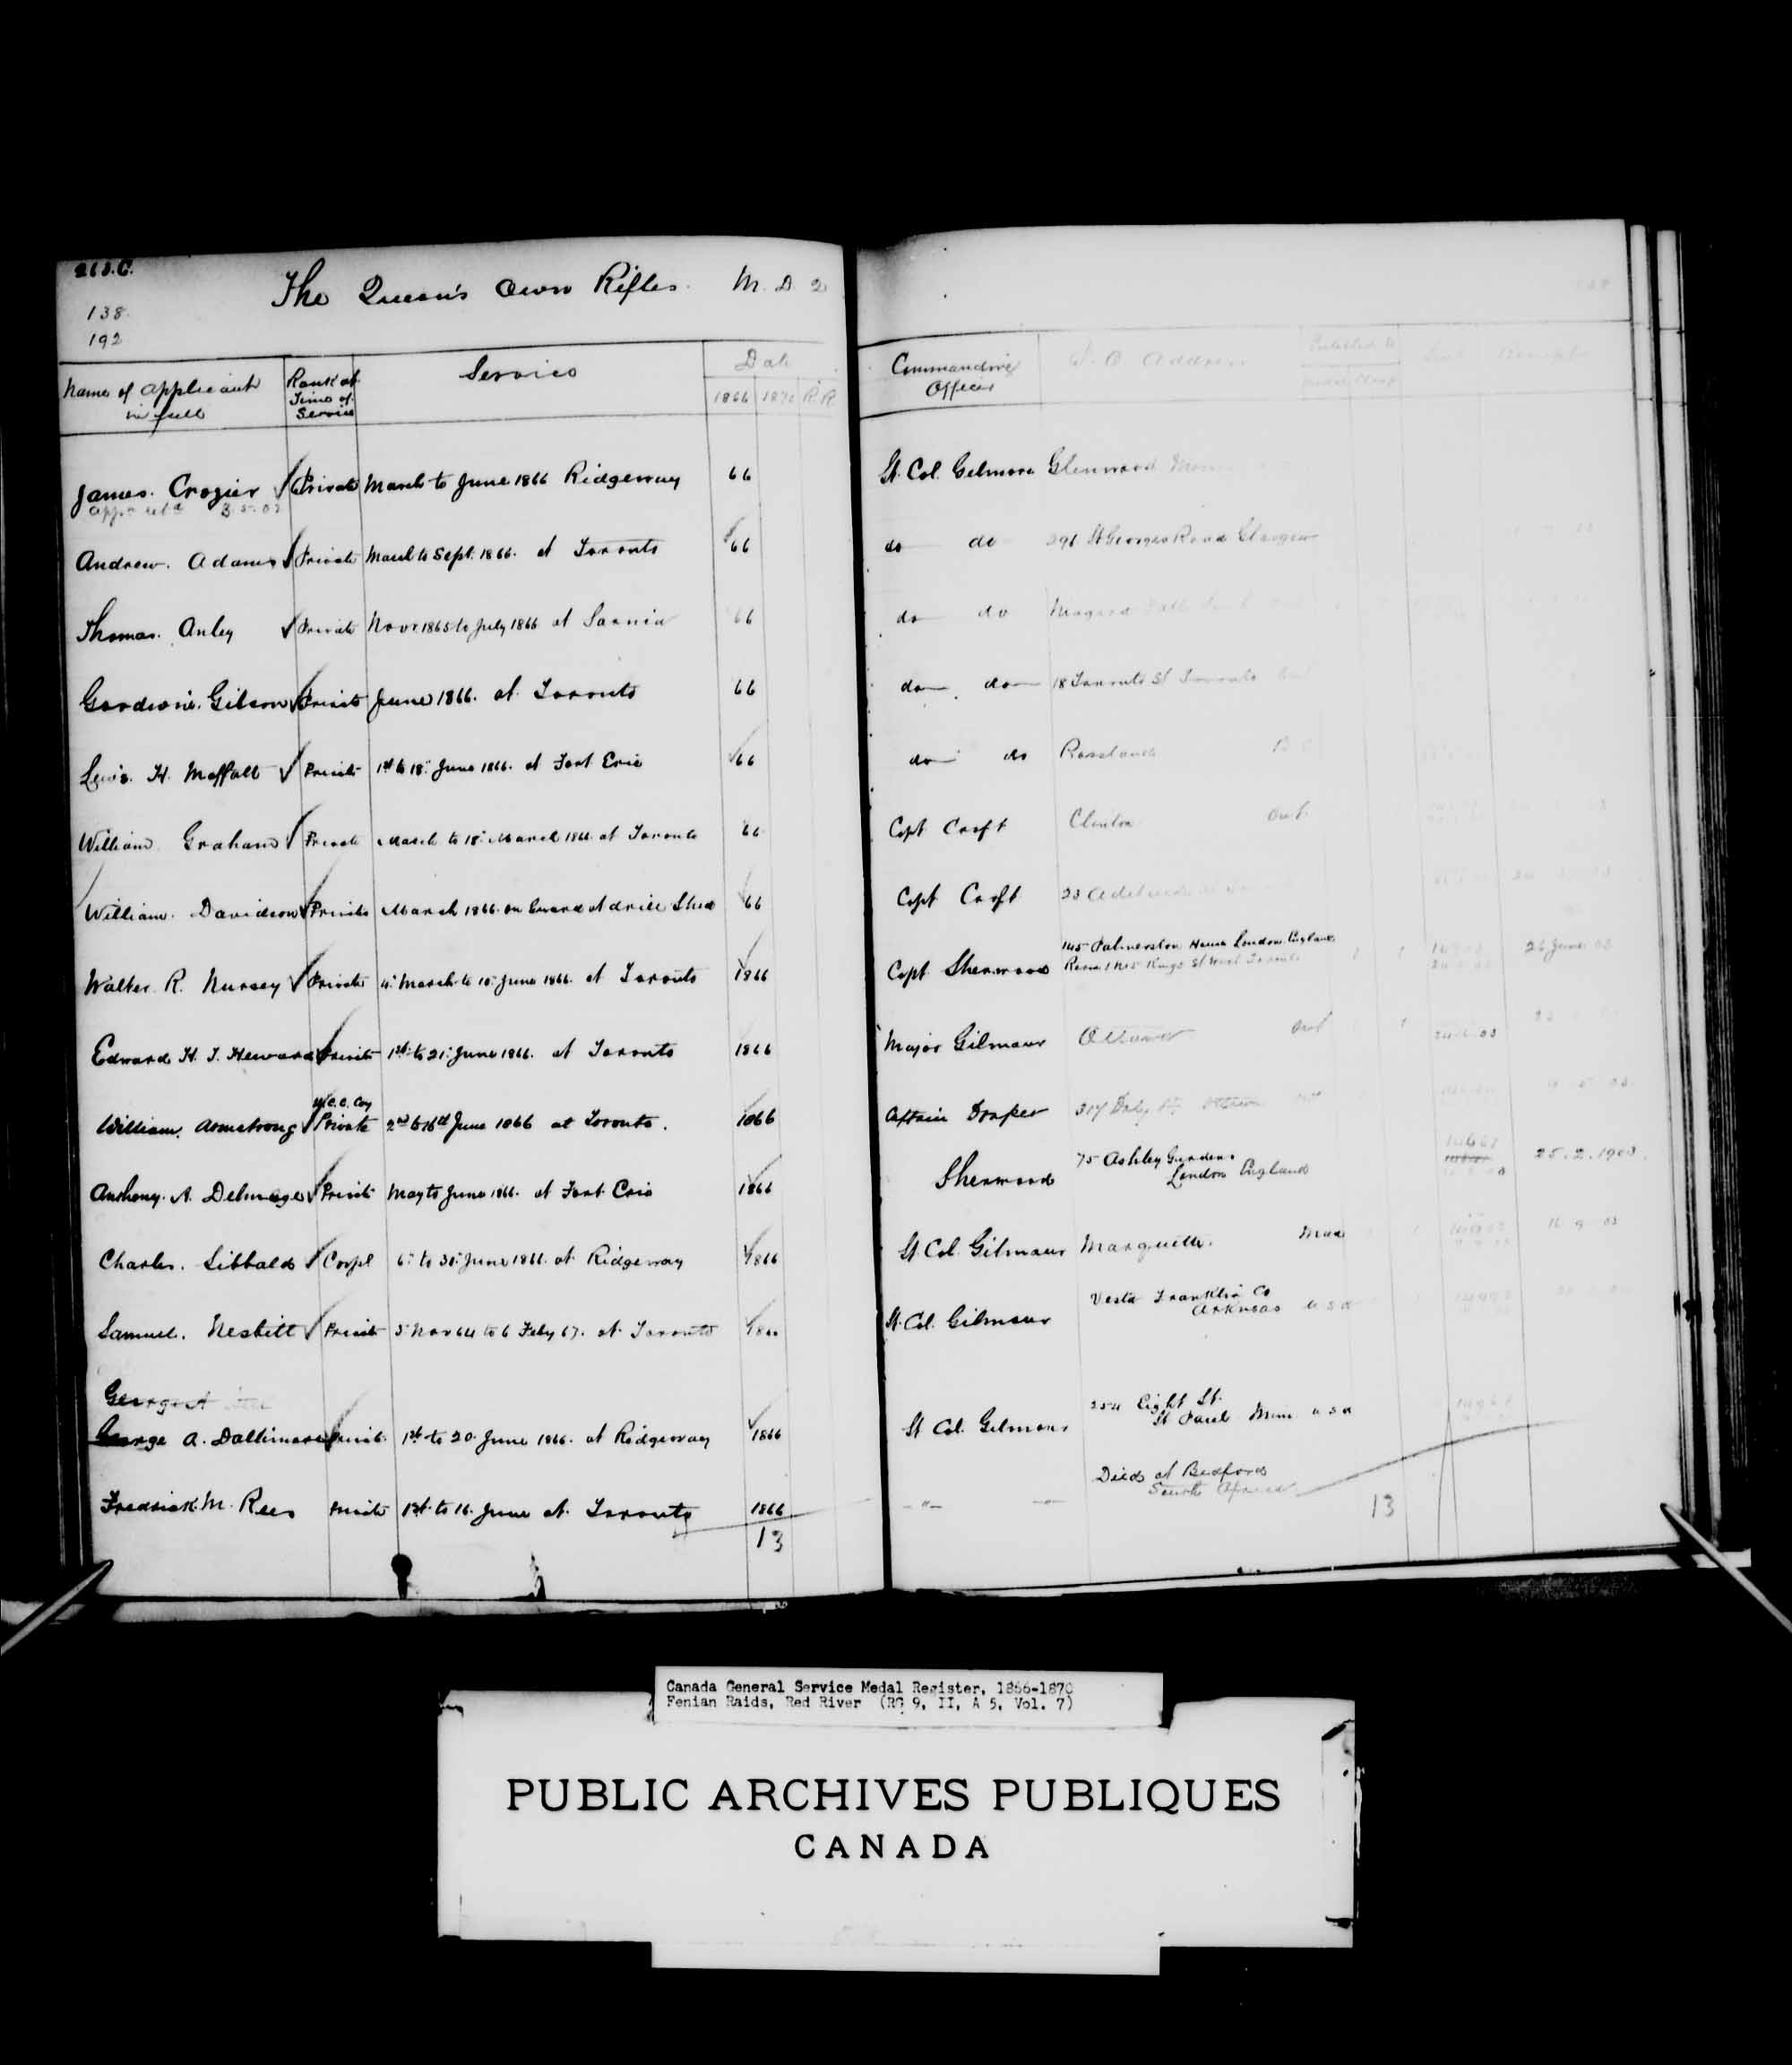 Digitized page of Medals, Honours and Awards for Image No.: e008682846